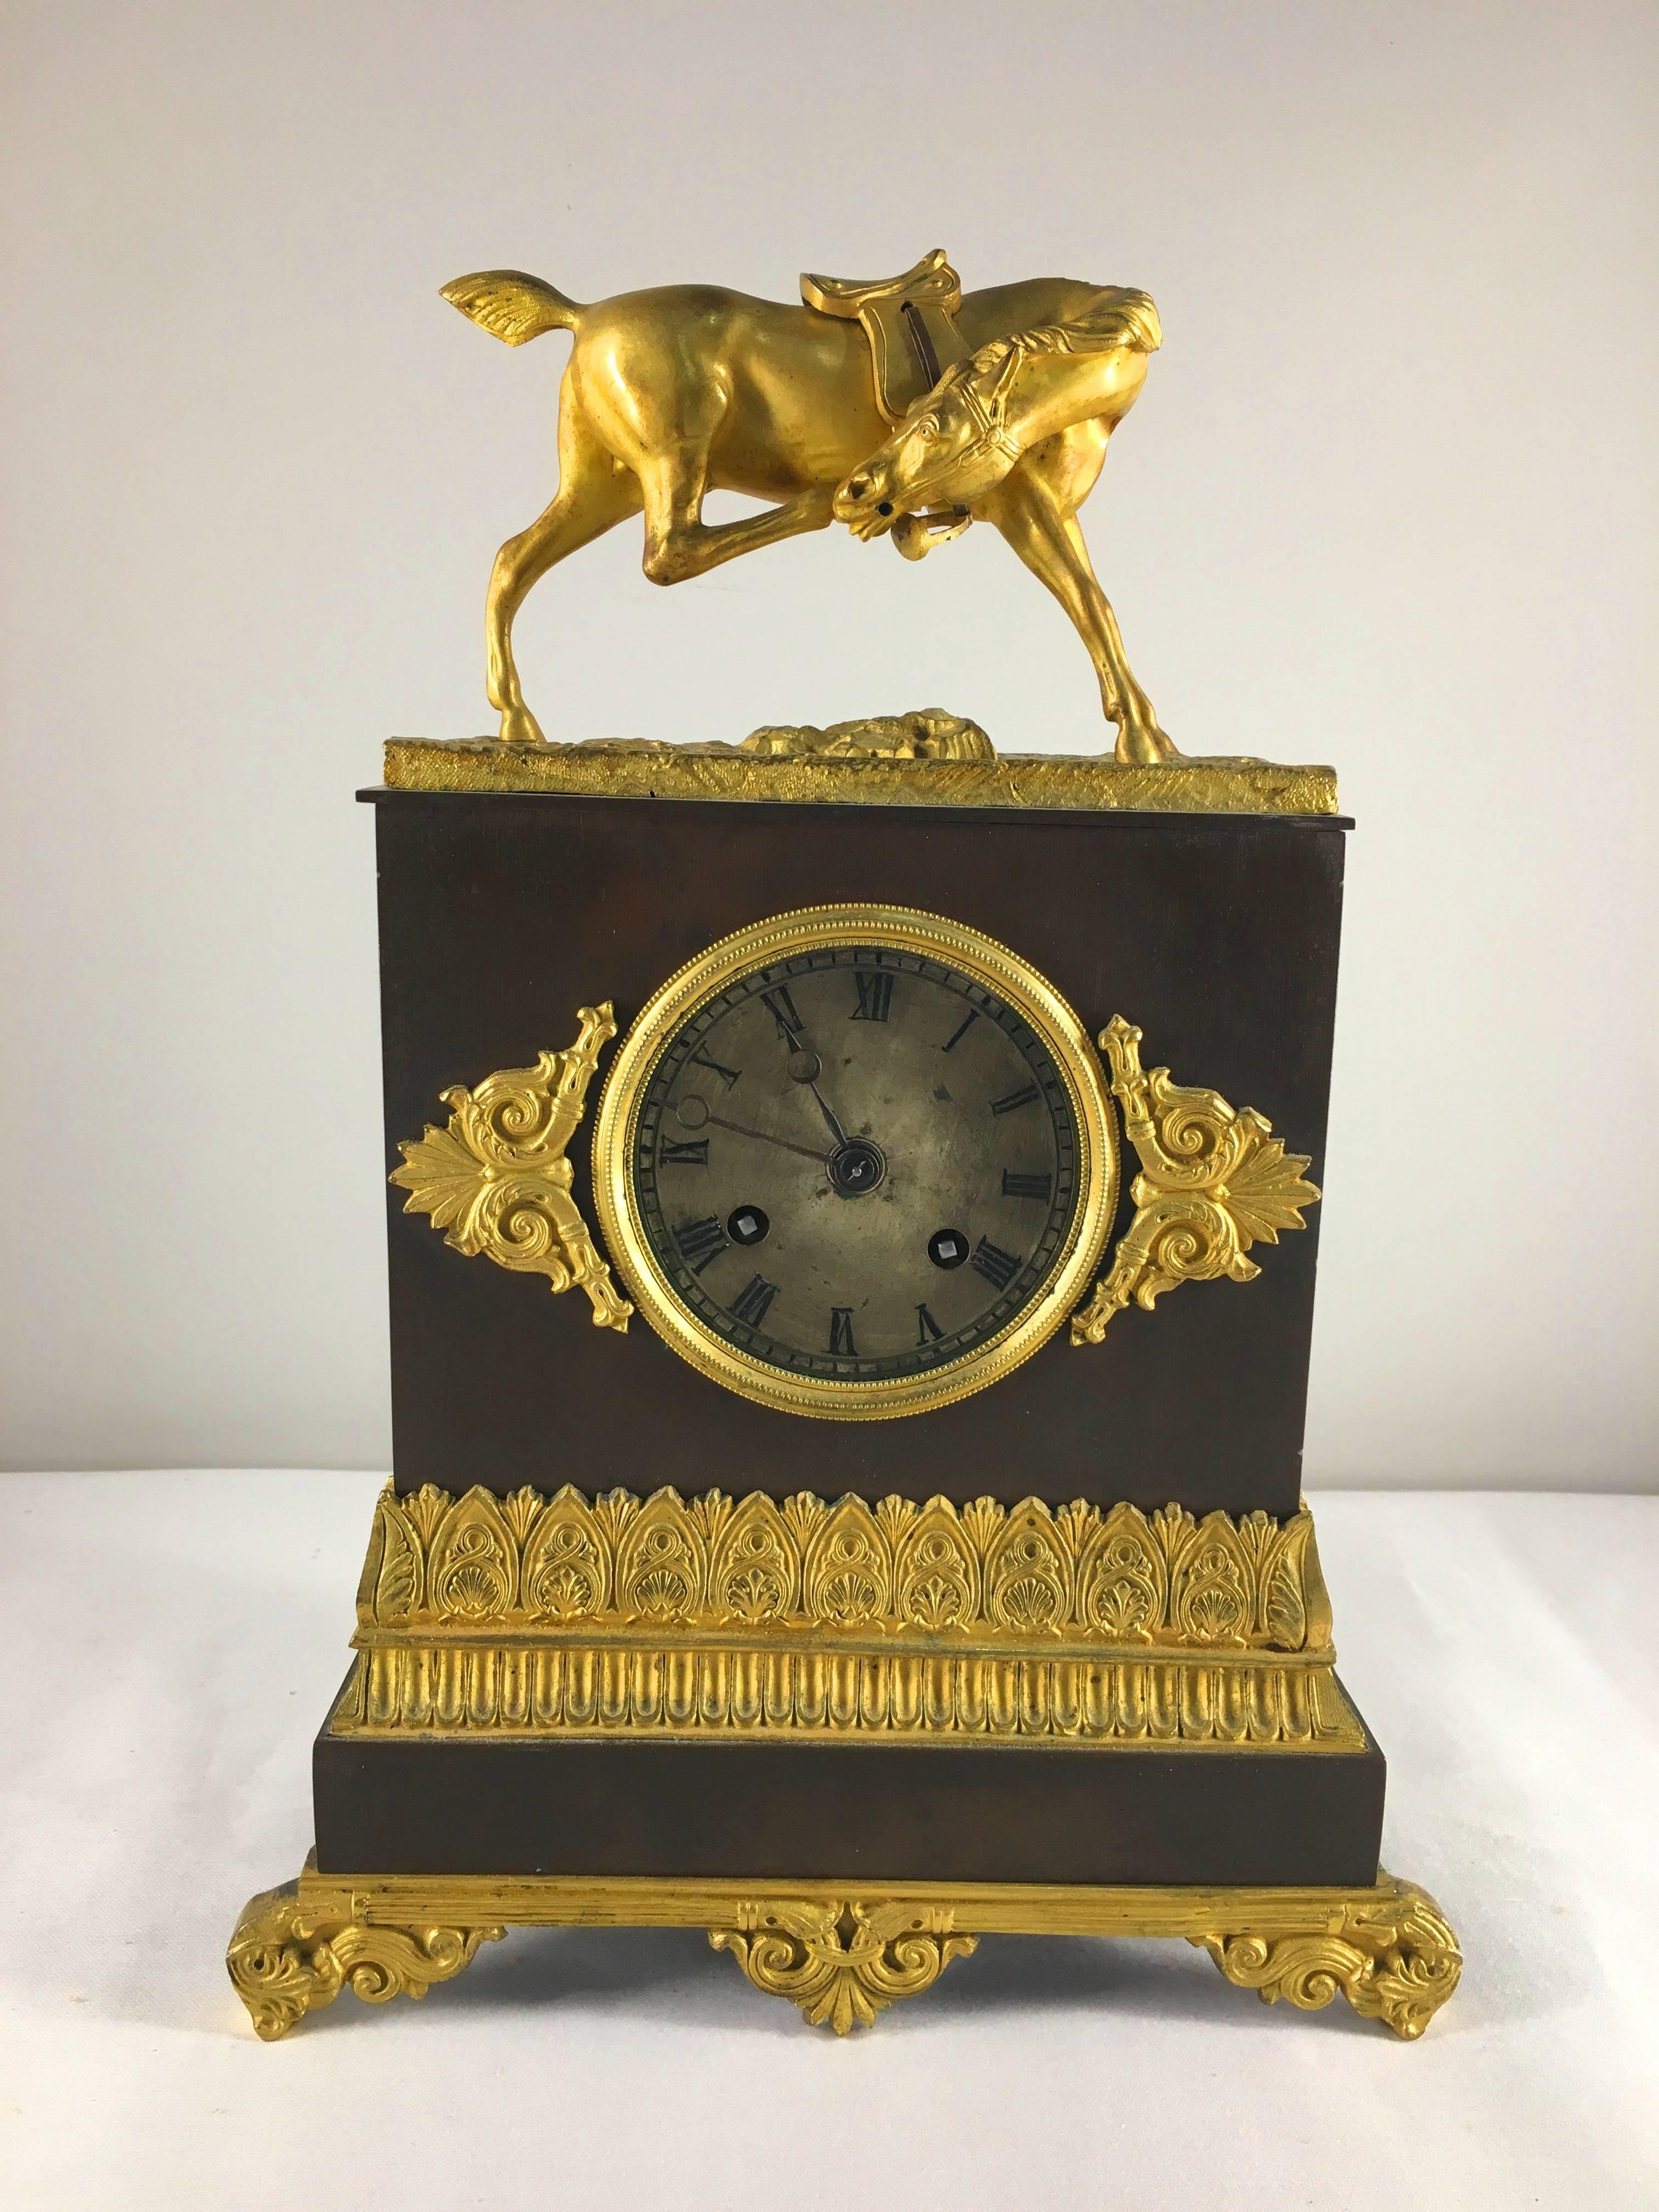 An early 19th century French Restauration period figural mantel clock, the patinated bronze case mounted with gilt bronze decoration, a silvered dial and the top mounted with a gilt bronze horse sculpture. The clock is running and keeps time well,